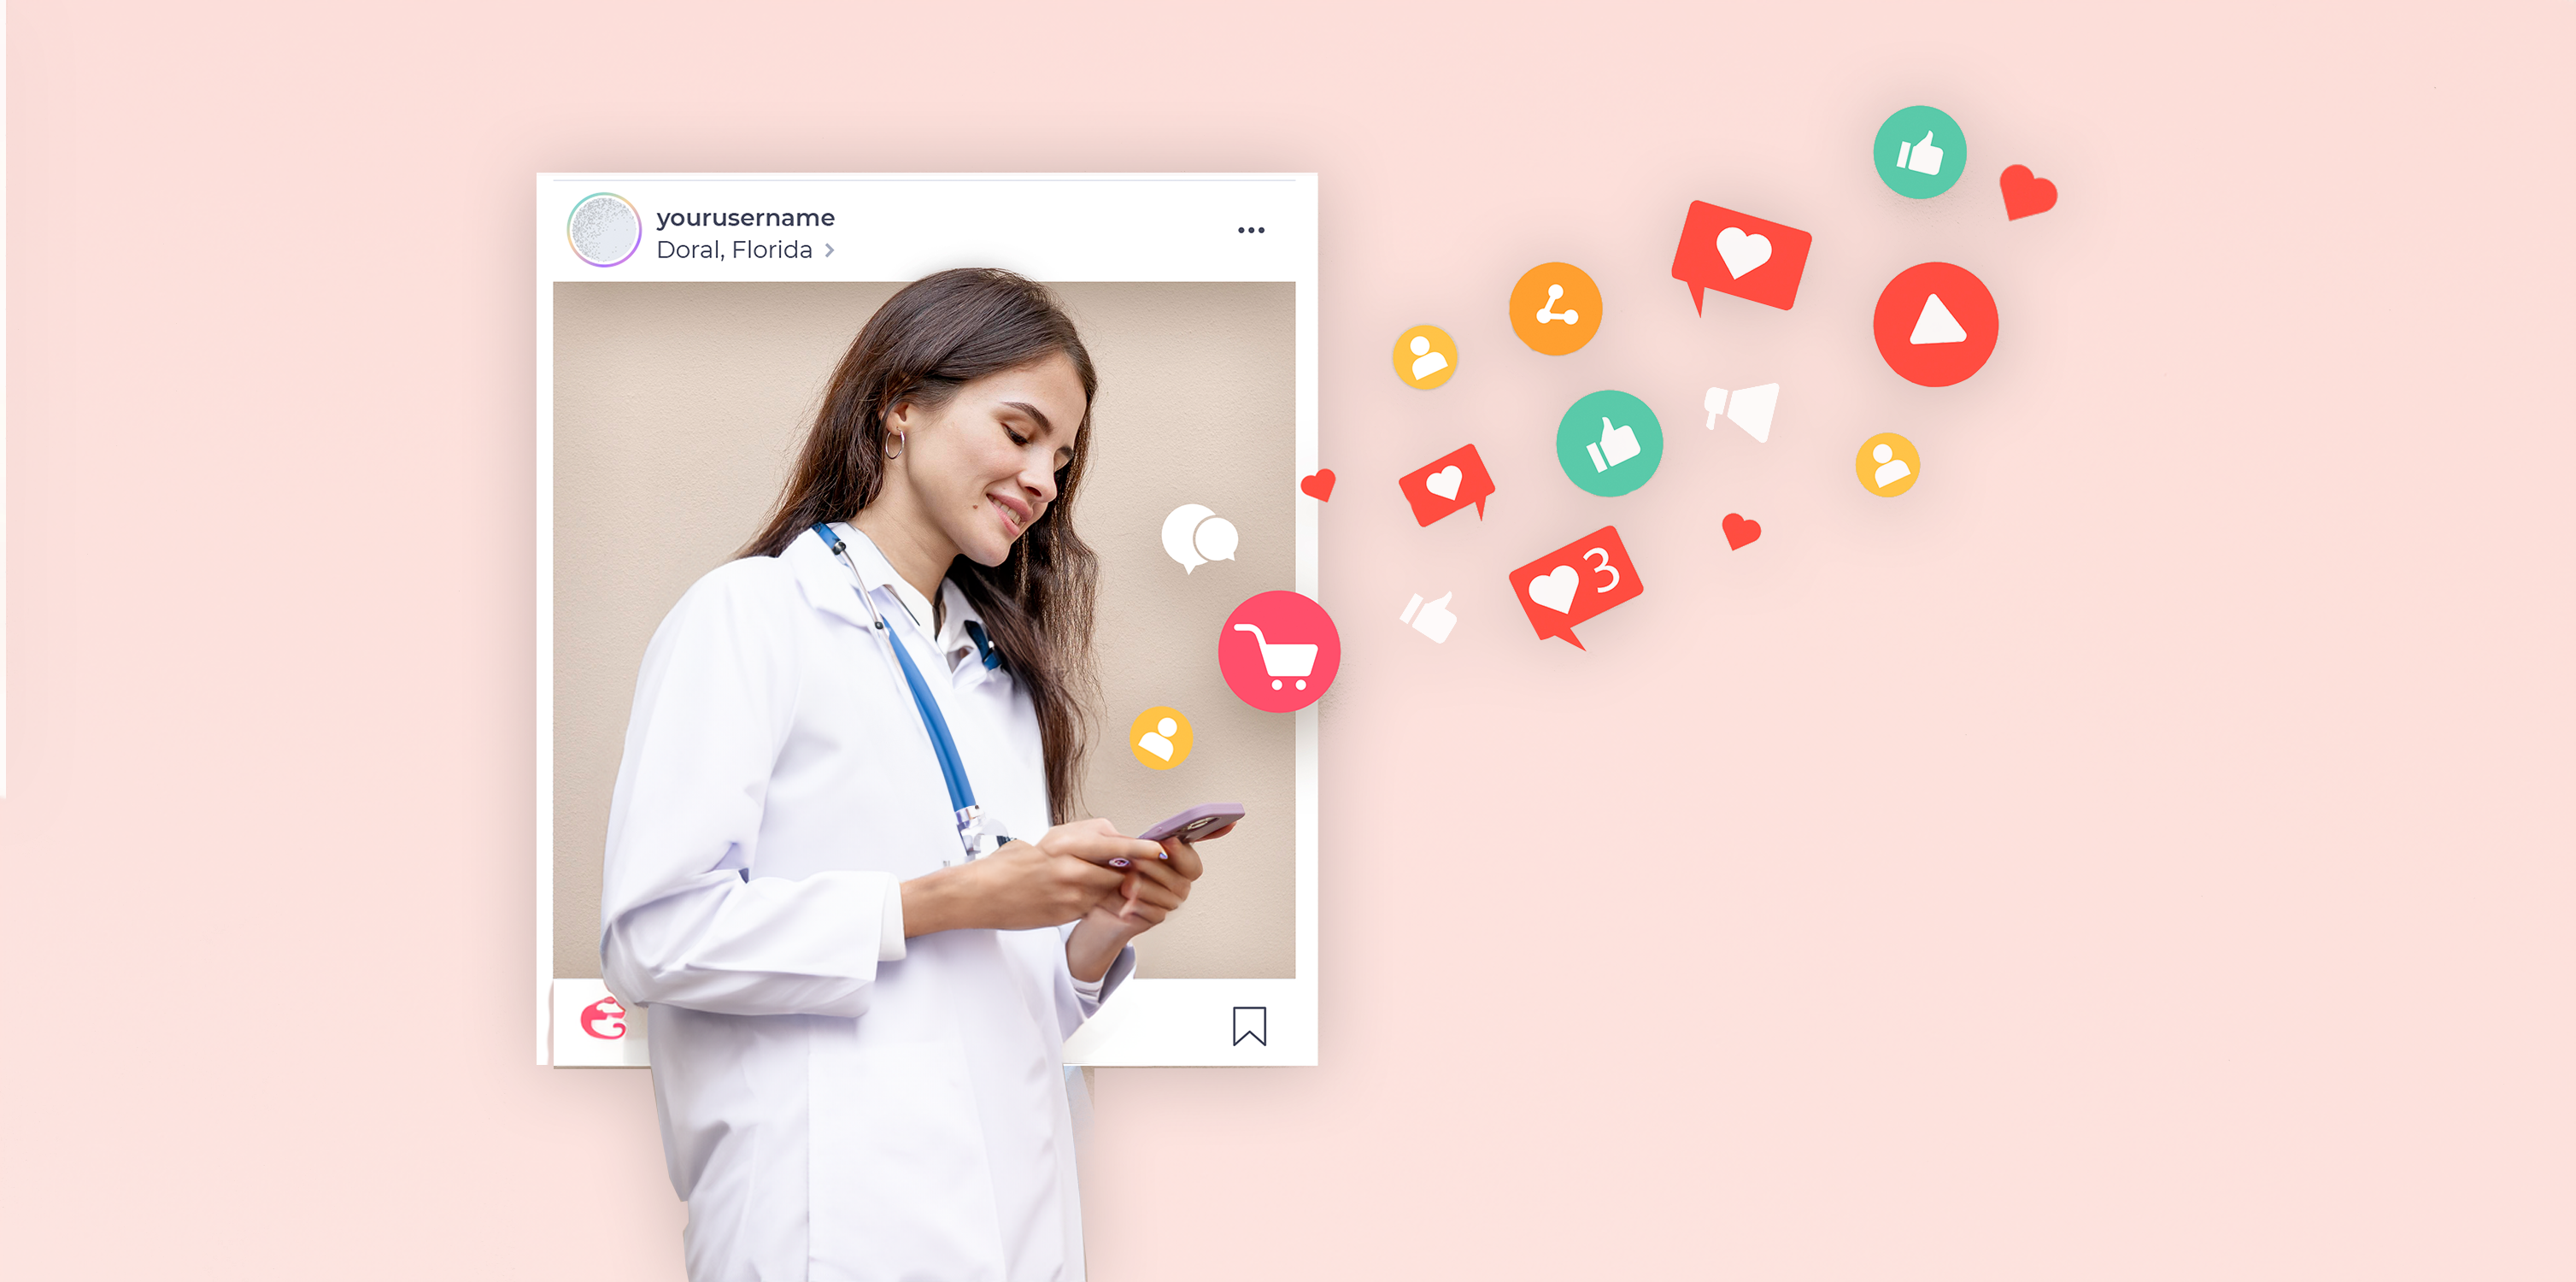 How to Make Social Media Marketing Work for Your Medical Practices